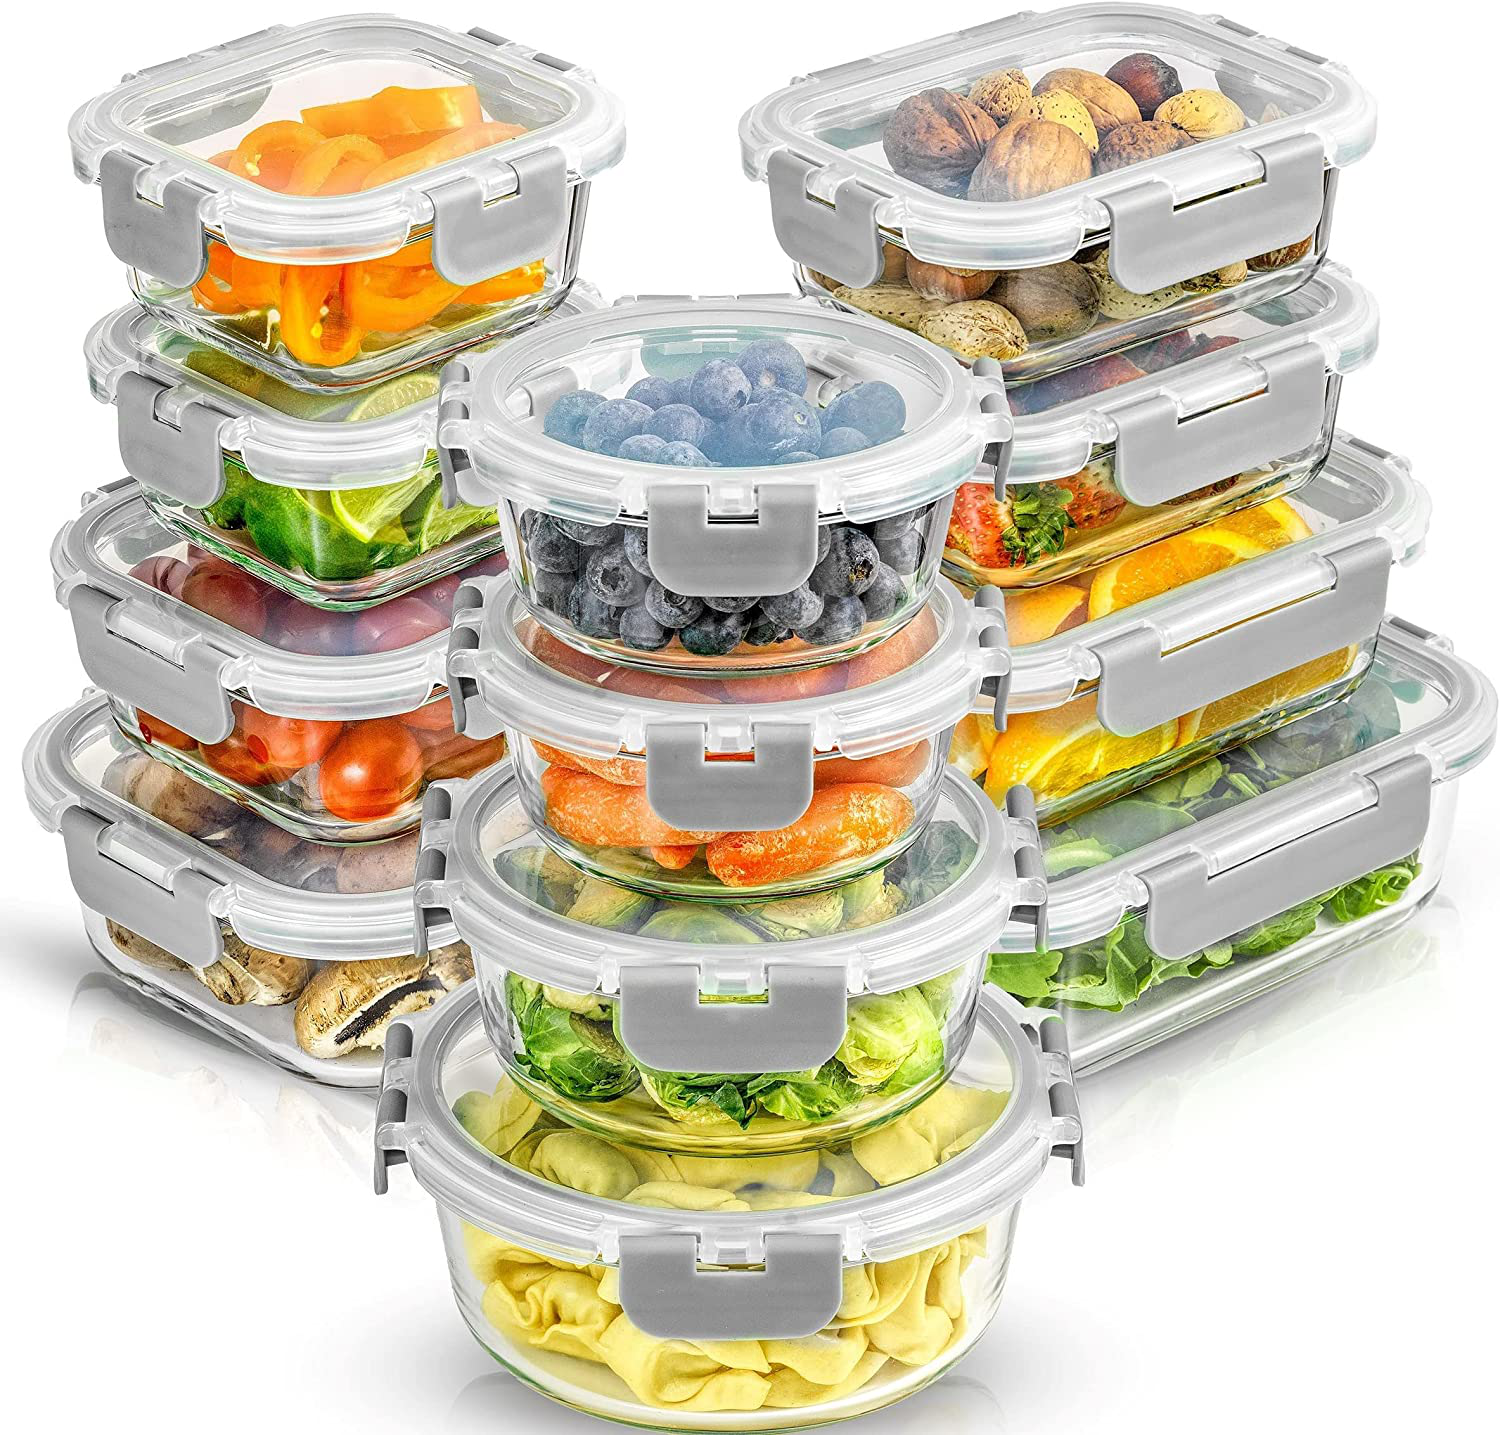 24 Pc Glass Food Storage Containers Airtight Lids Microwave/Oven